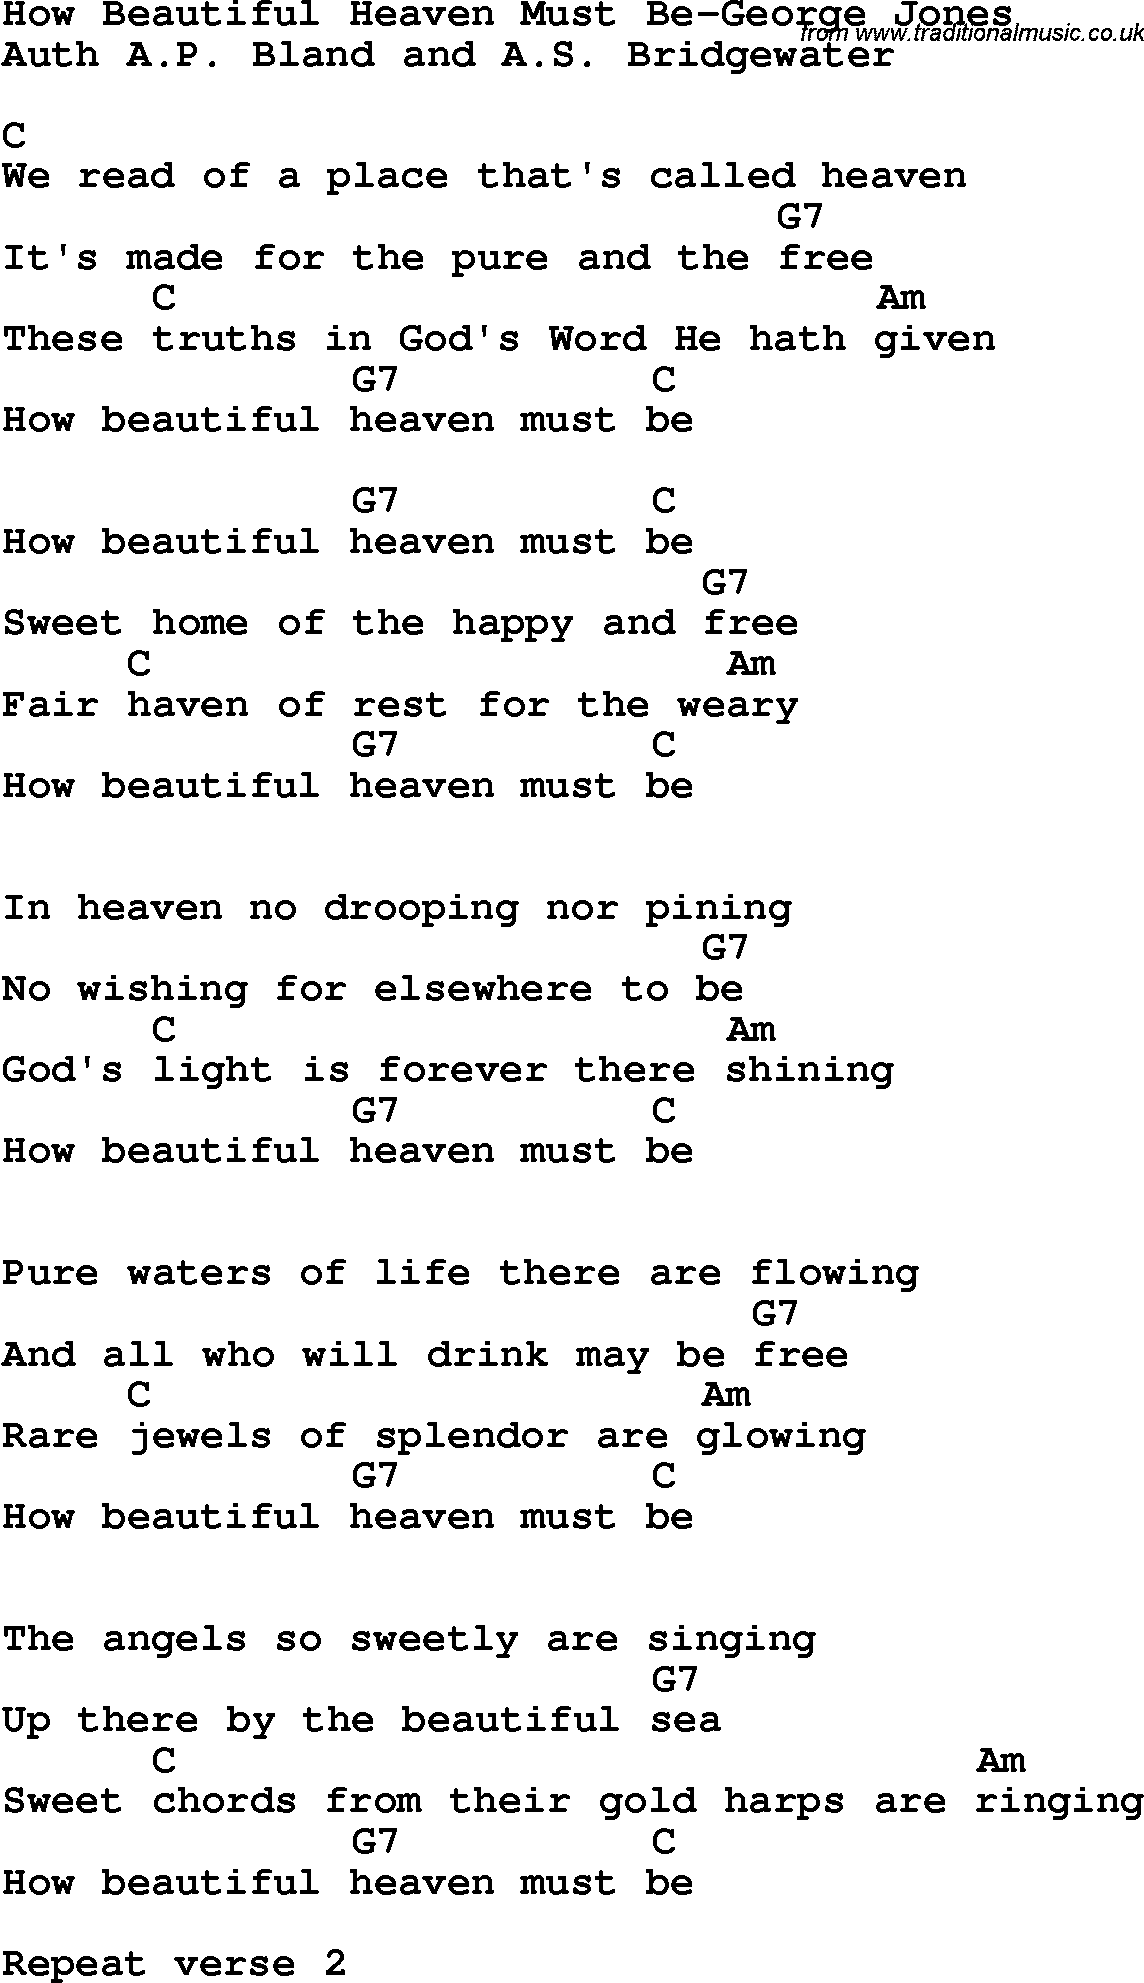 Country, Southern and Bluegrass Gospel Song How Beautiful Heaven Must Be-George Jones lyrics and chords